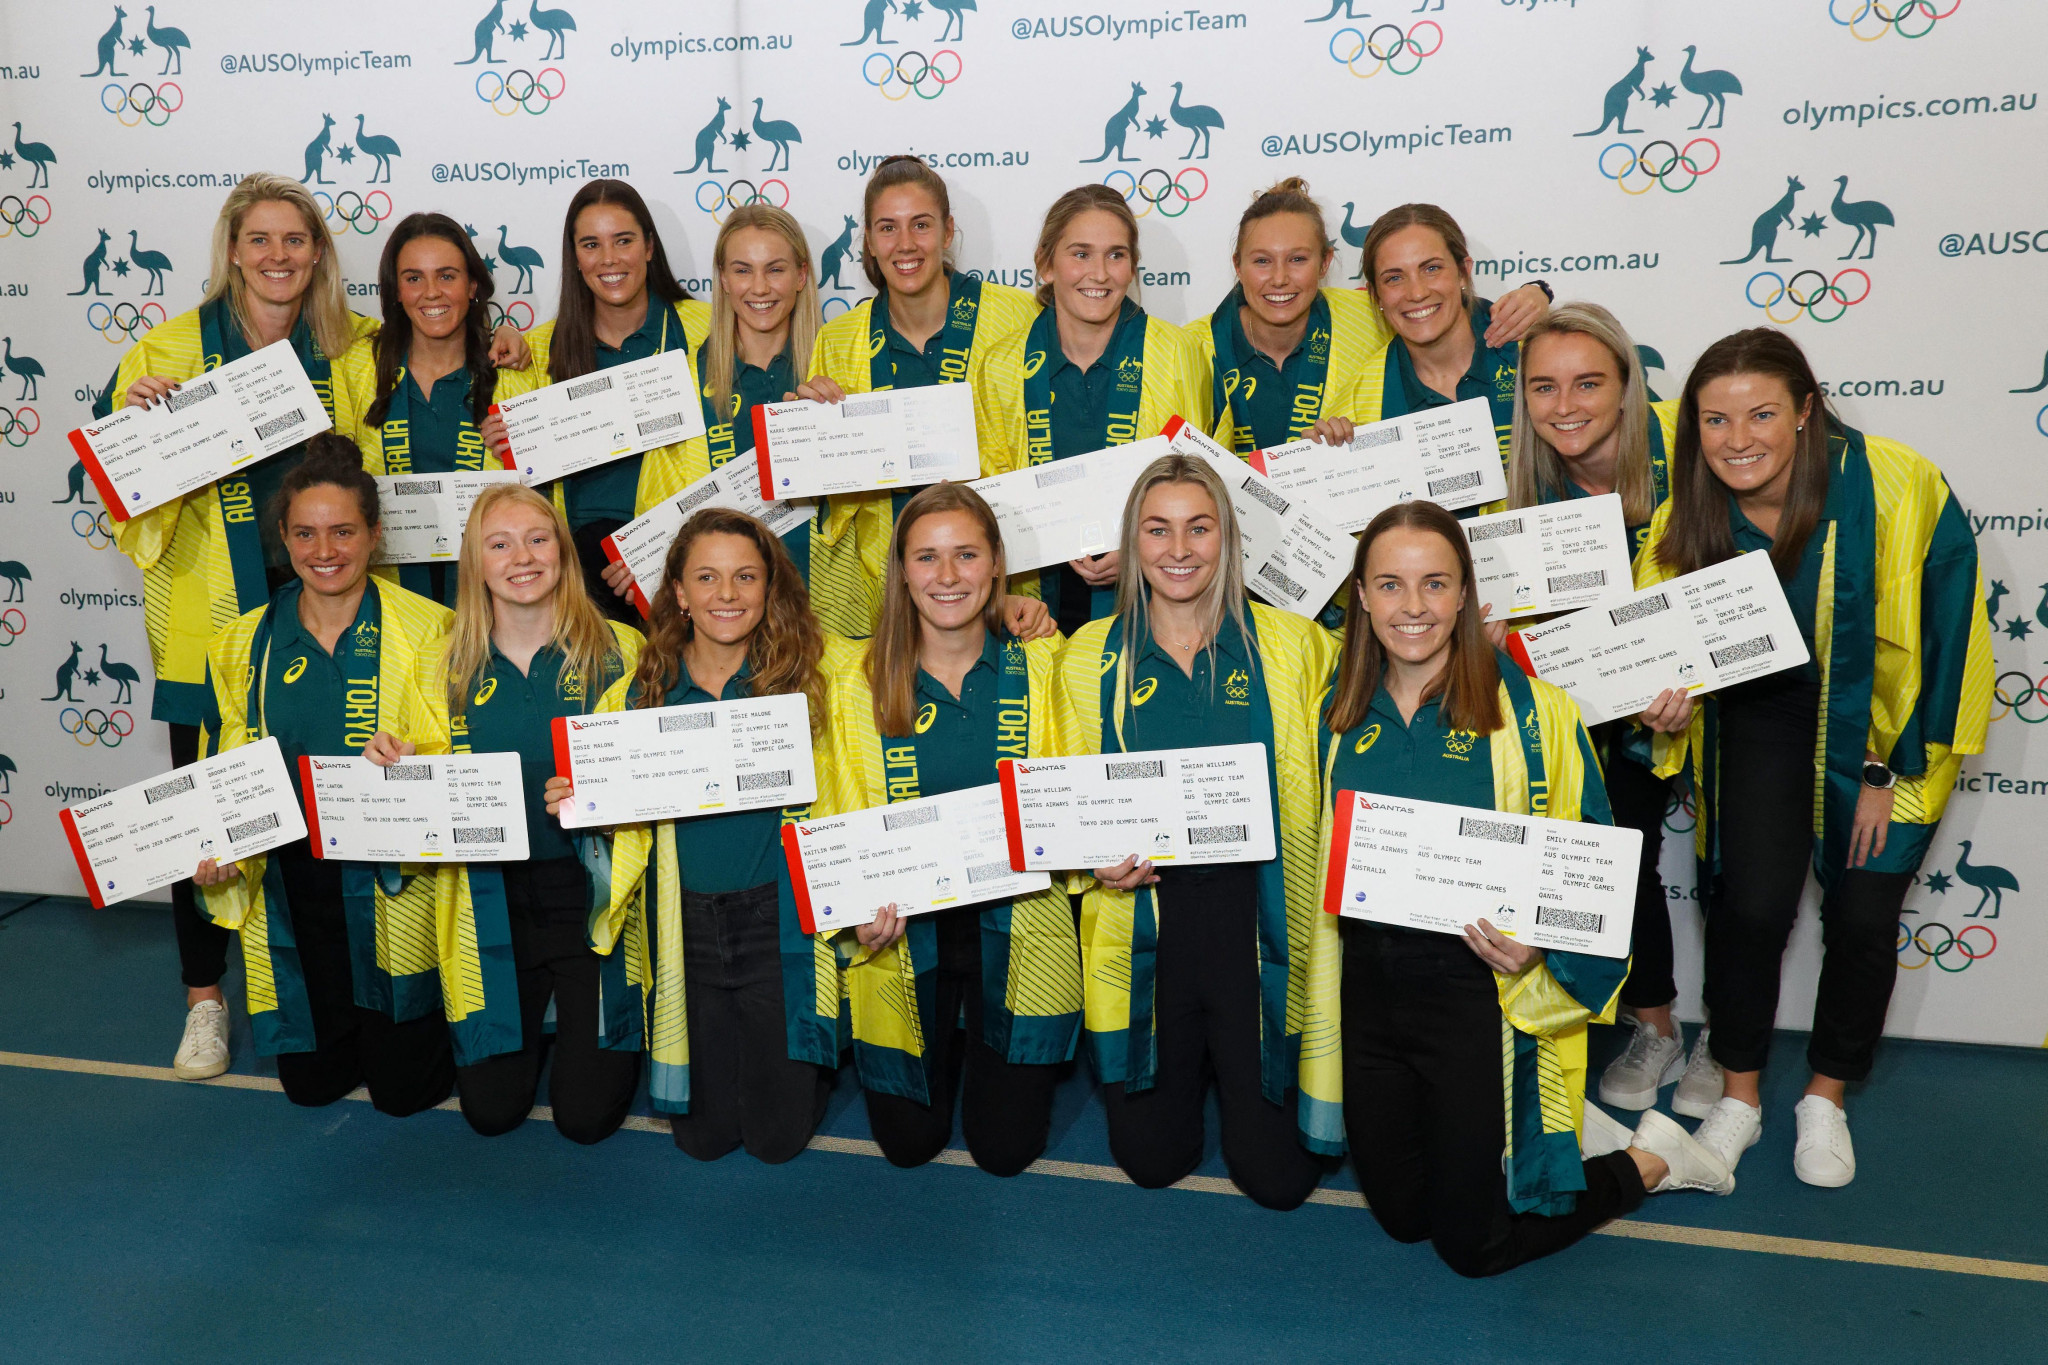 Australia selects women's hockey team for Tokyo 2020 but mystery player appeals omission